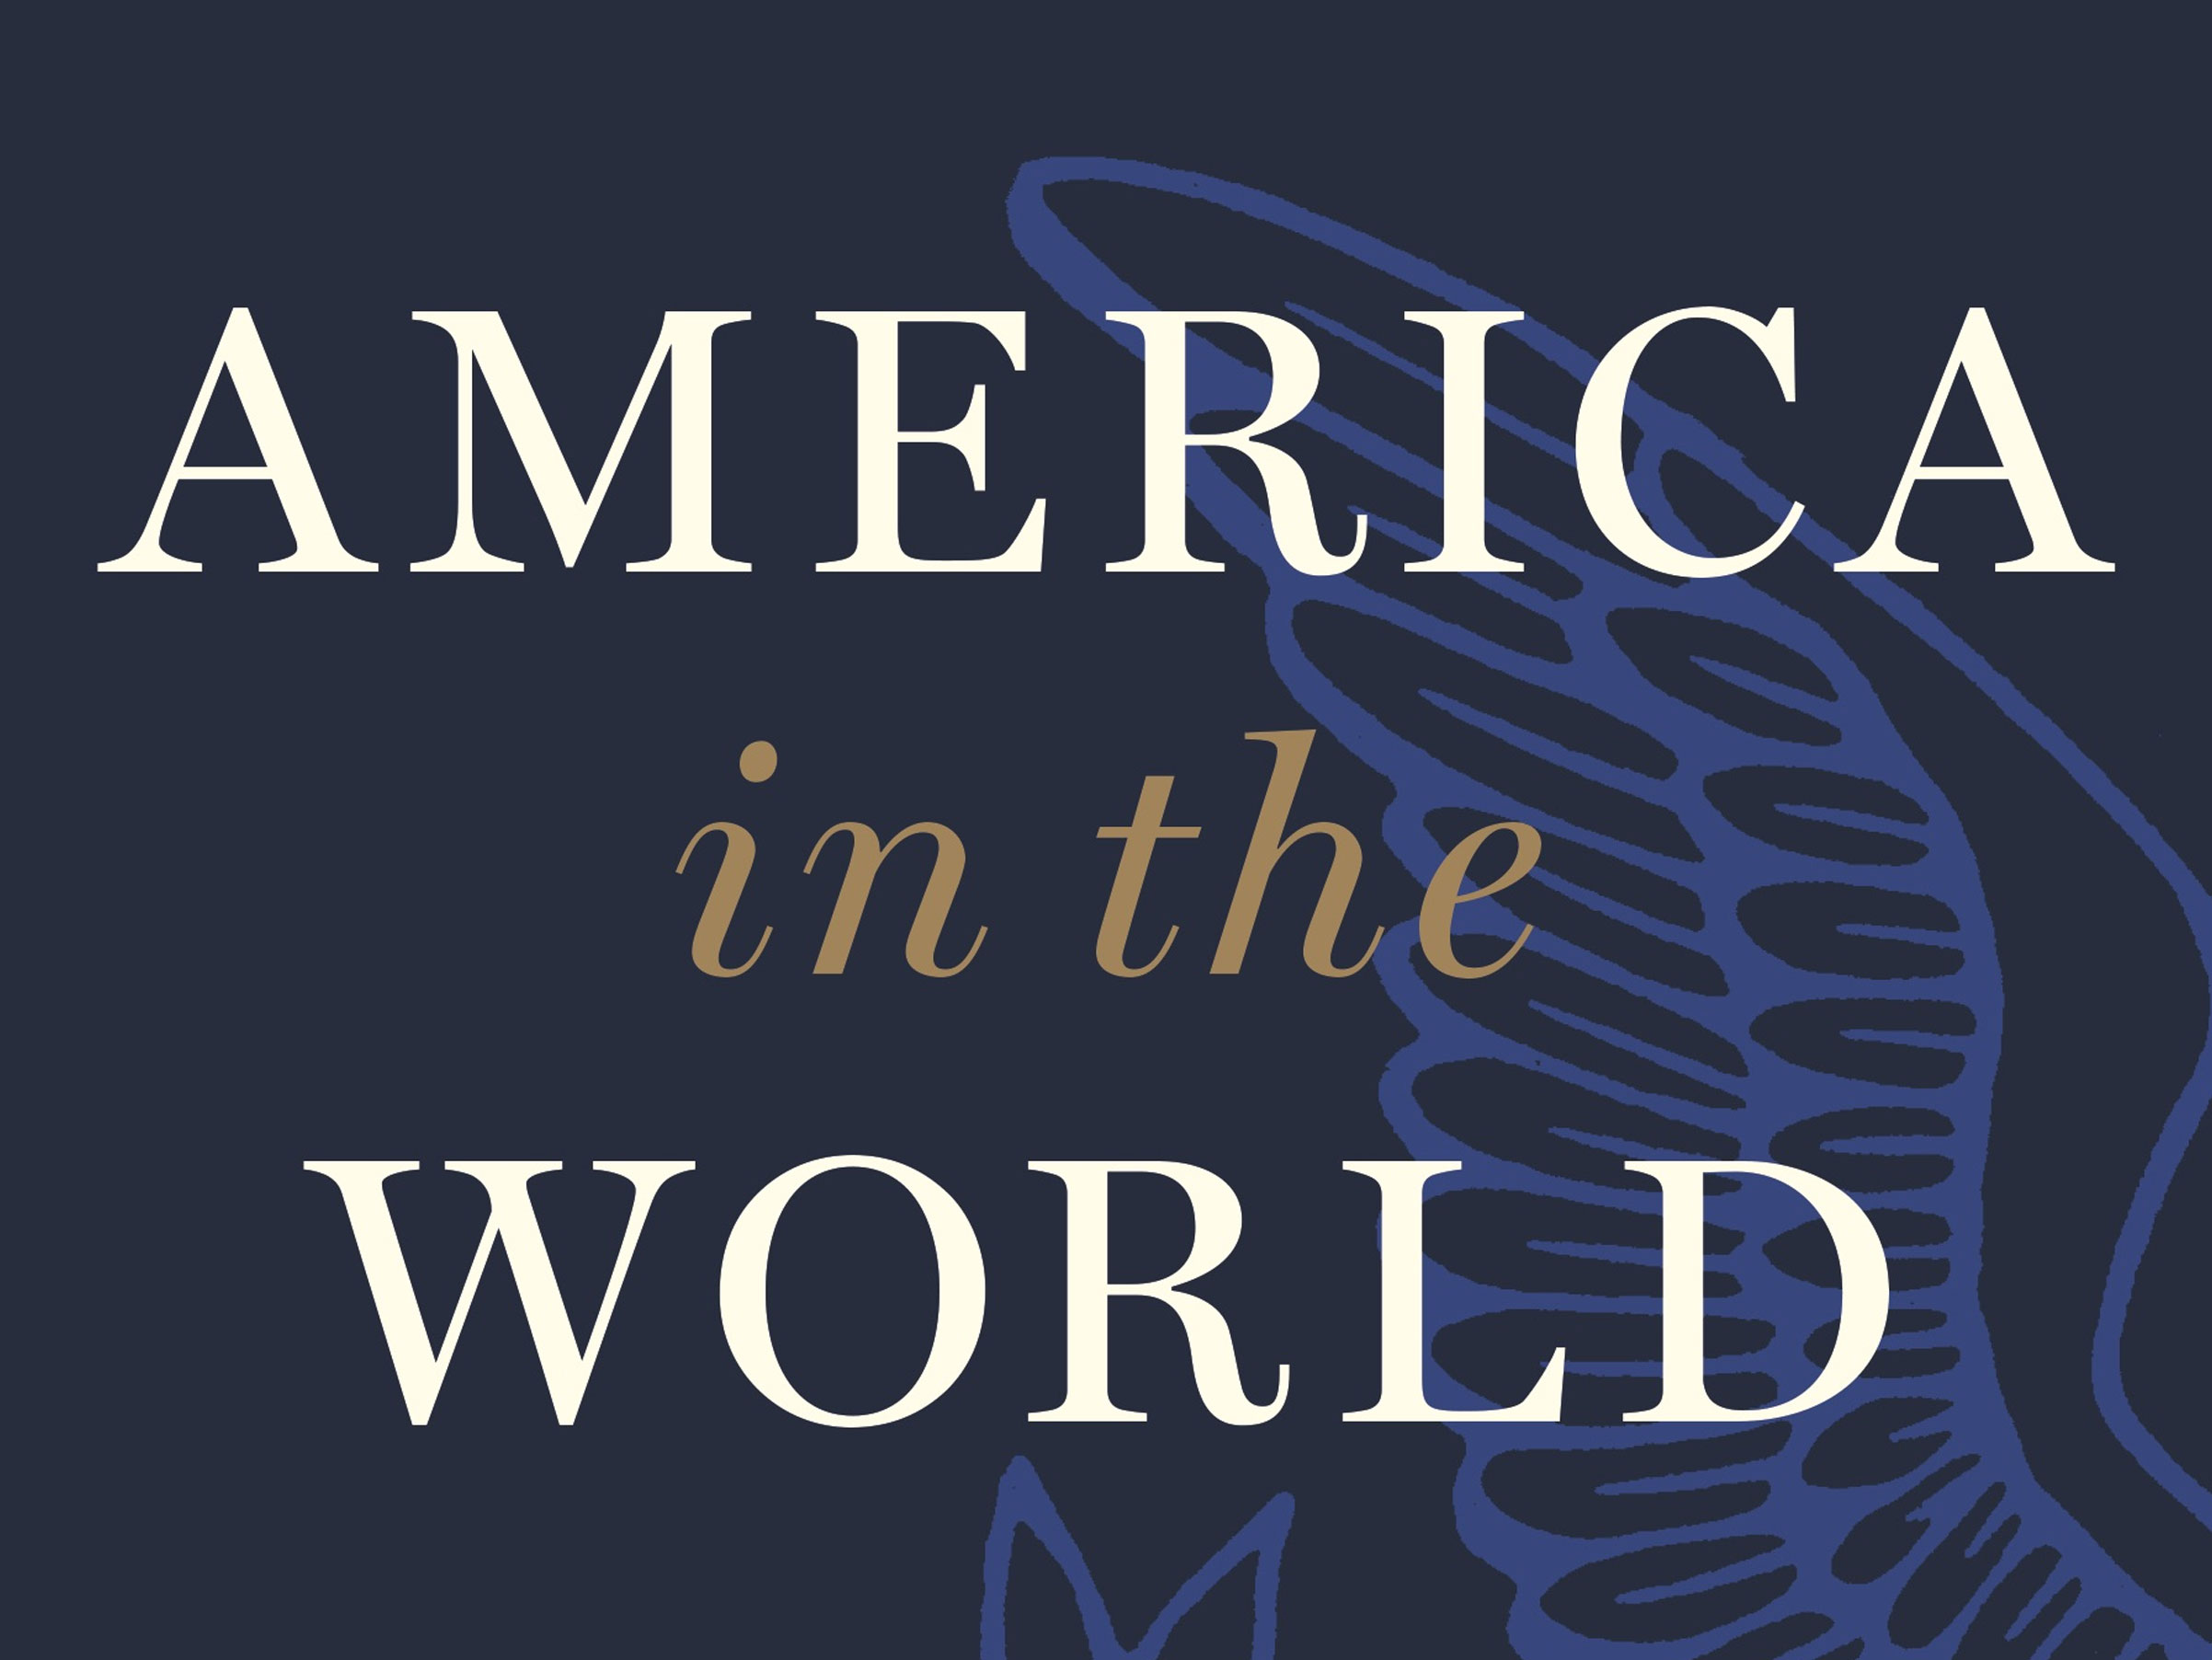 America in the World: A History of U.S. Diplomacy and Foreign Policy